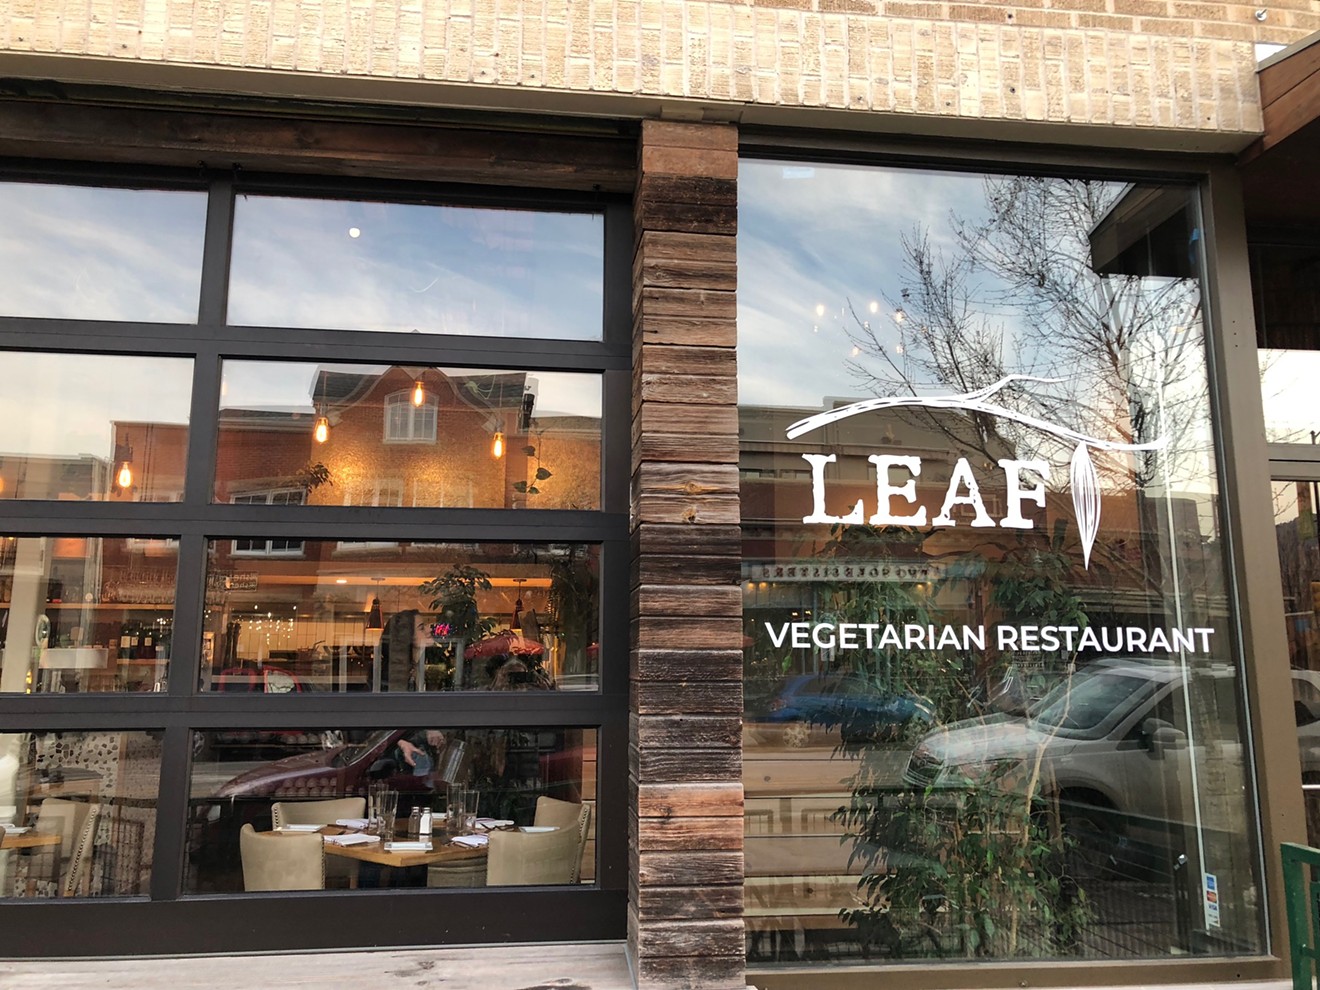 Leaf just sprouted in its new location on Pearl Street in Boulder.